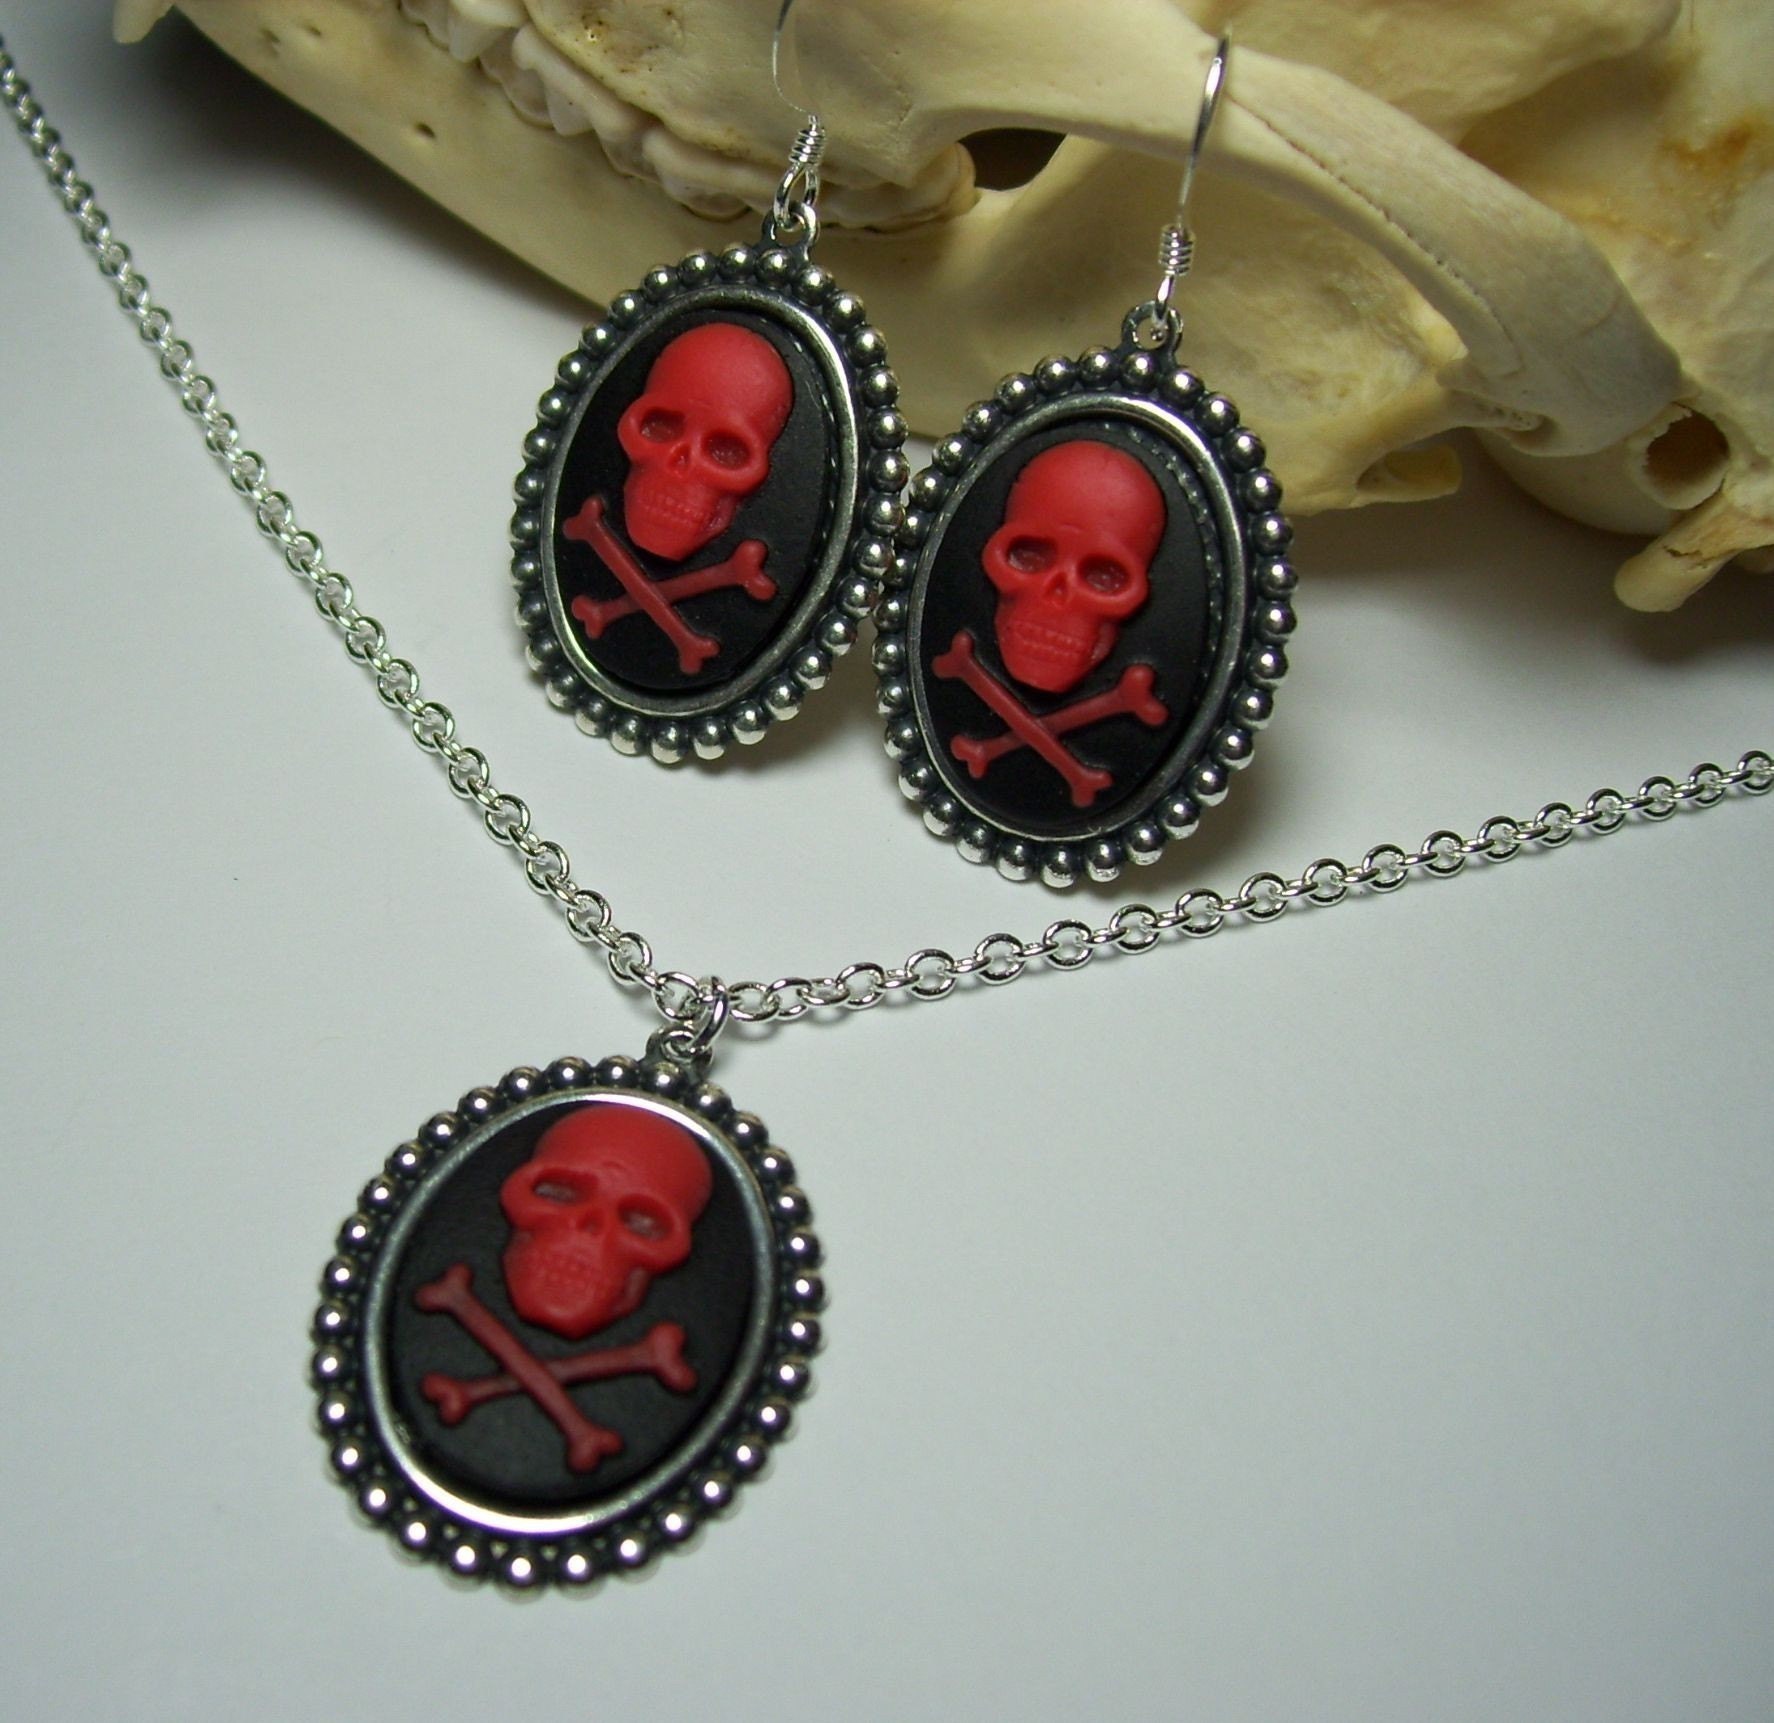 Antique Silver Red on Black Skull and Cross Bones Cameo Gothic Pendant Necklace and Earrings Set